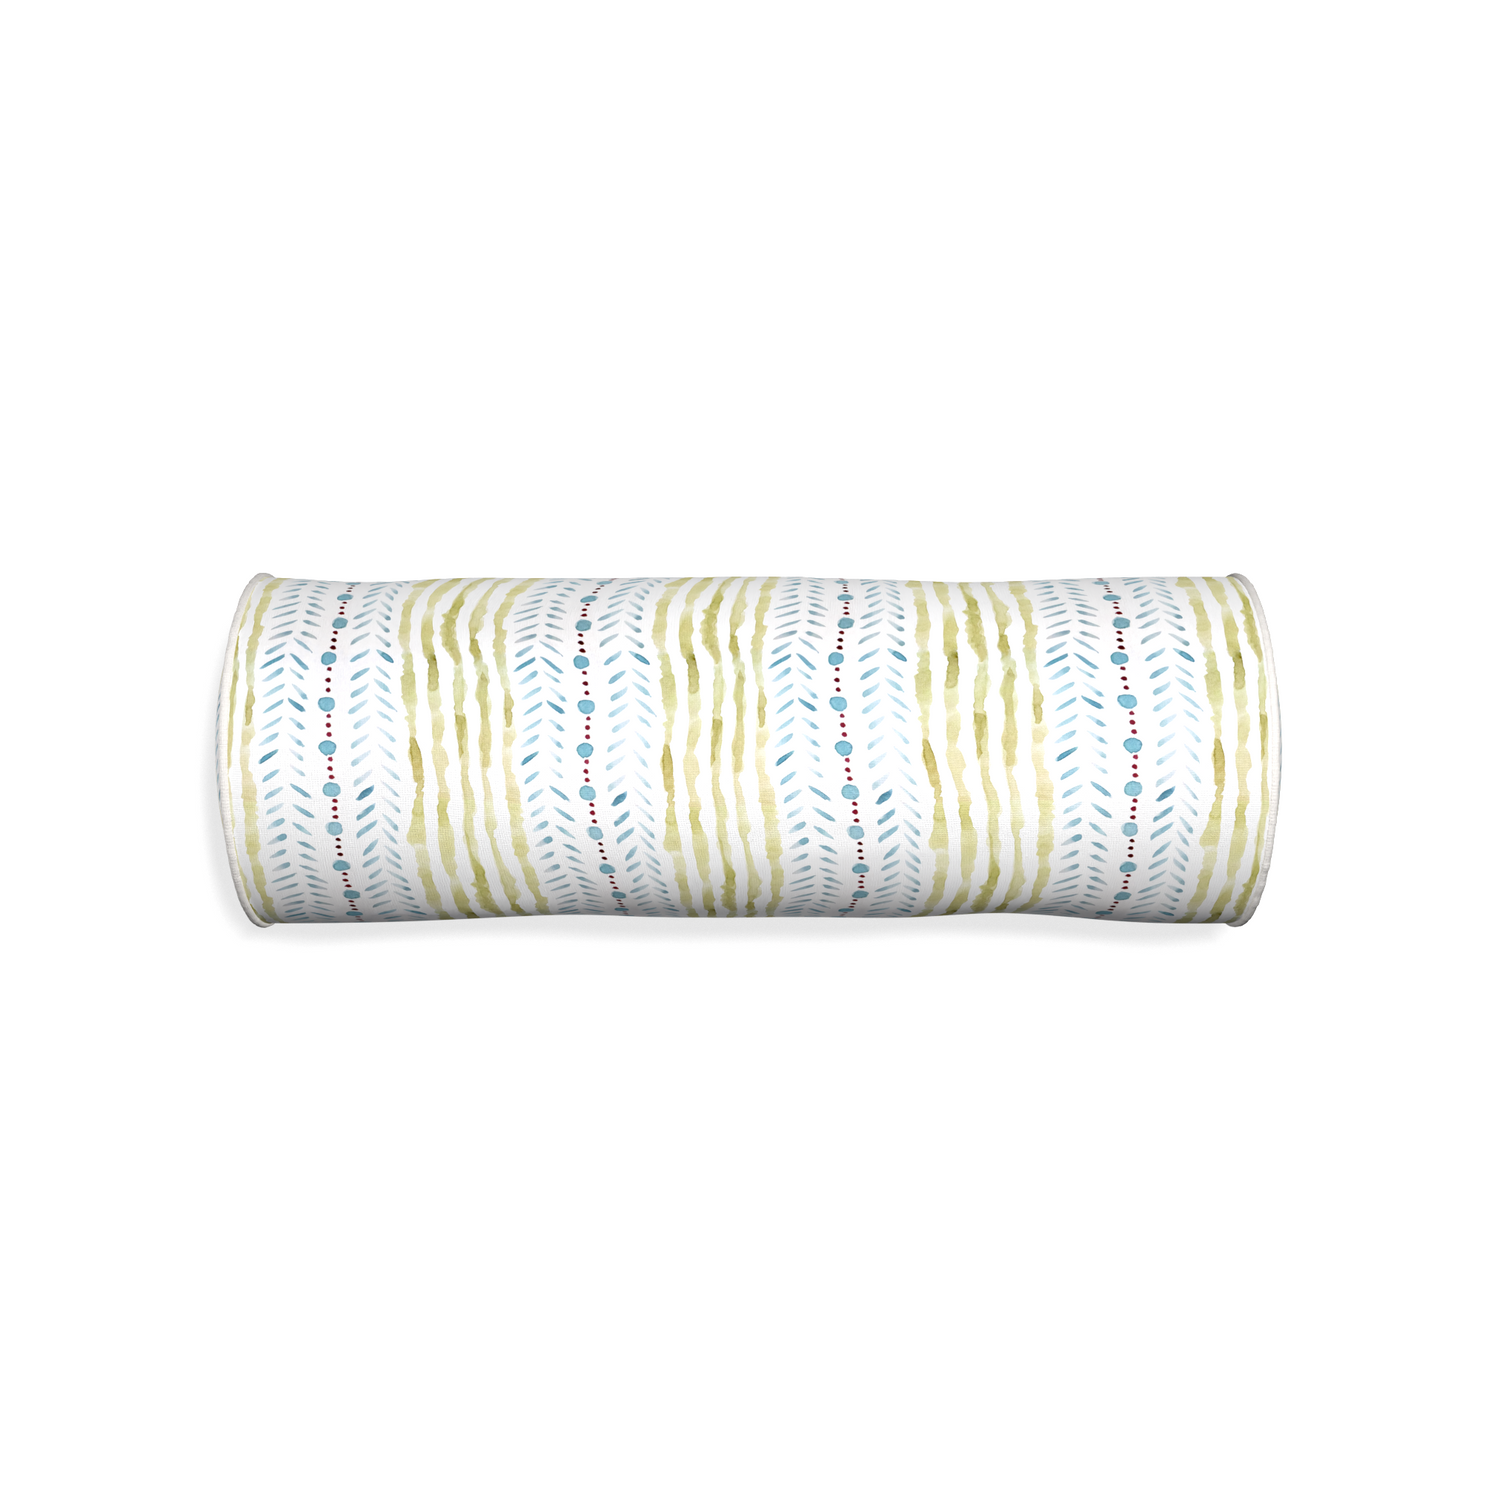 Bolster julia custom blue & green stripedpillow with snow piping on white background